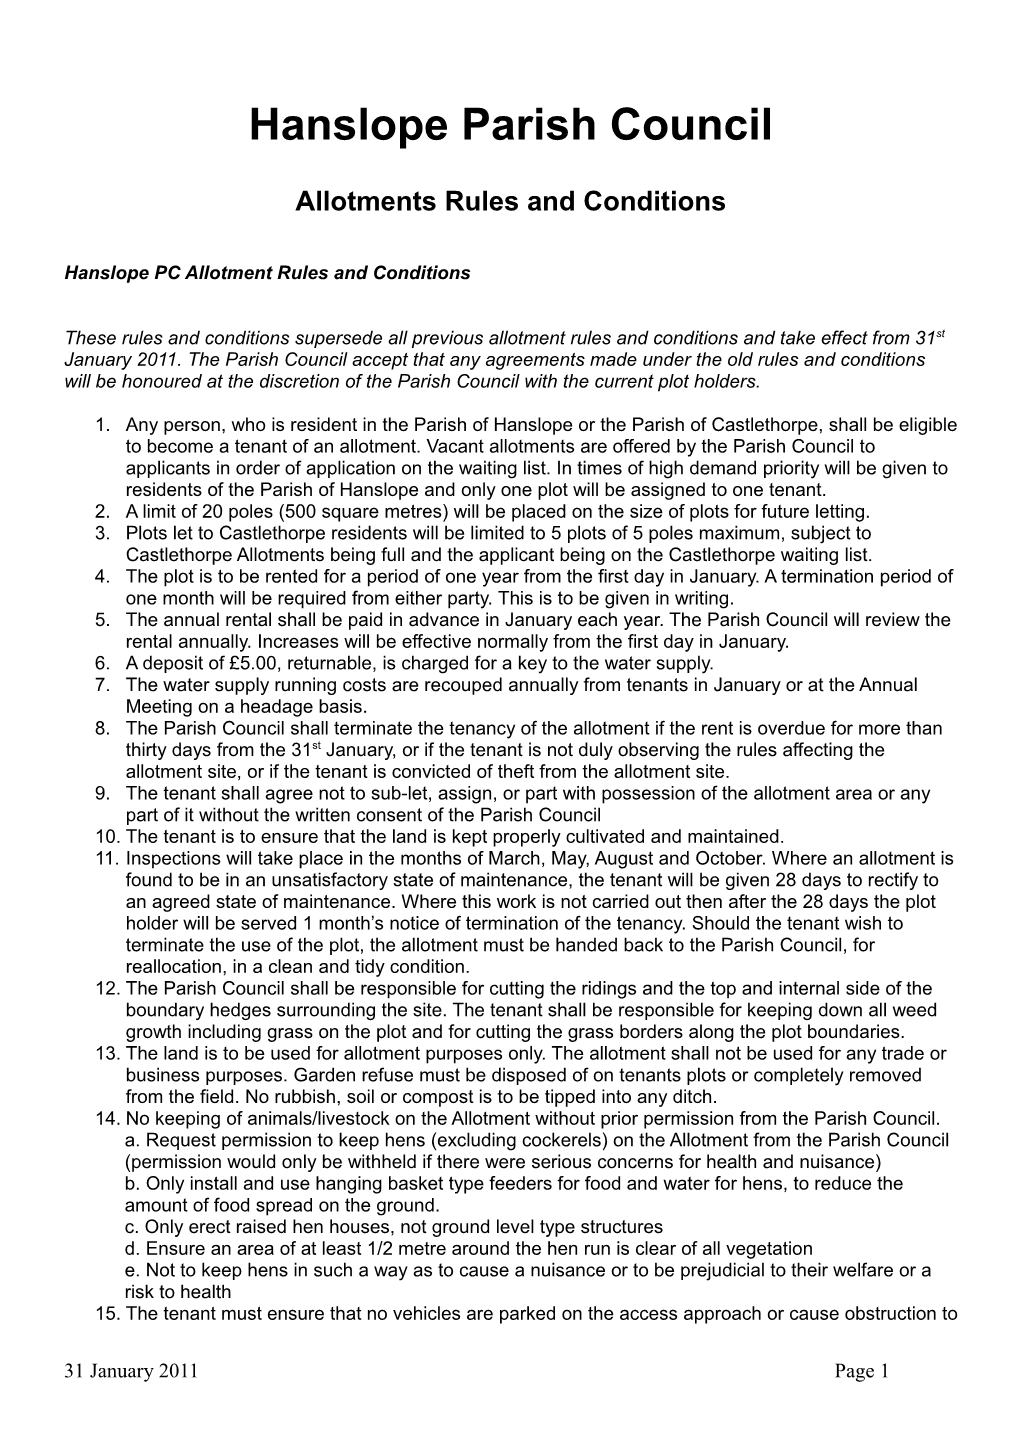 Hanslope PC Allotment Rules and Conditions